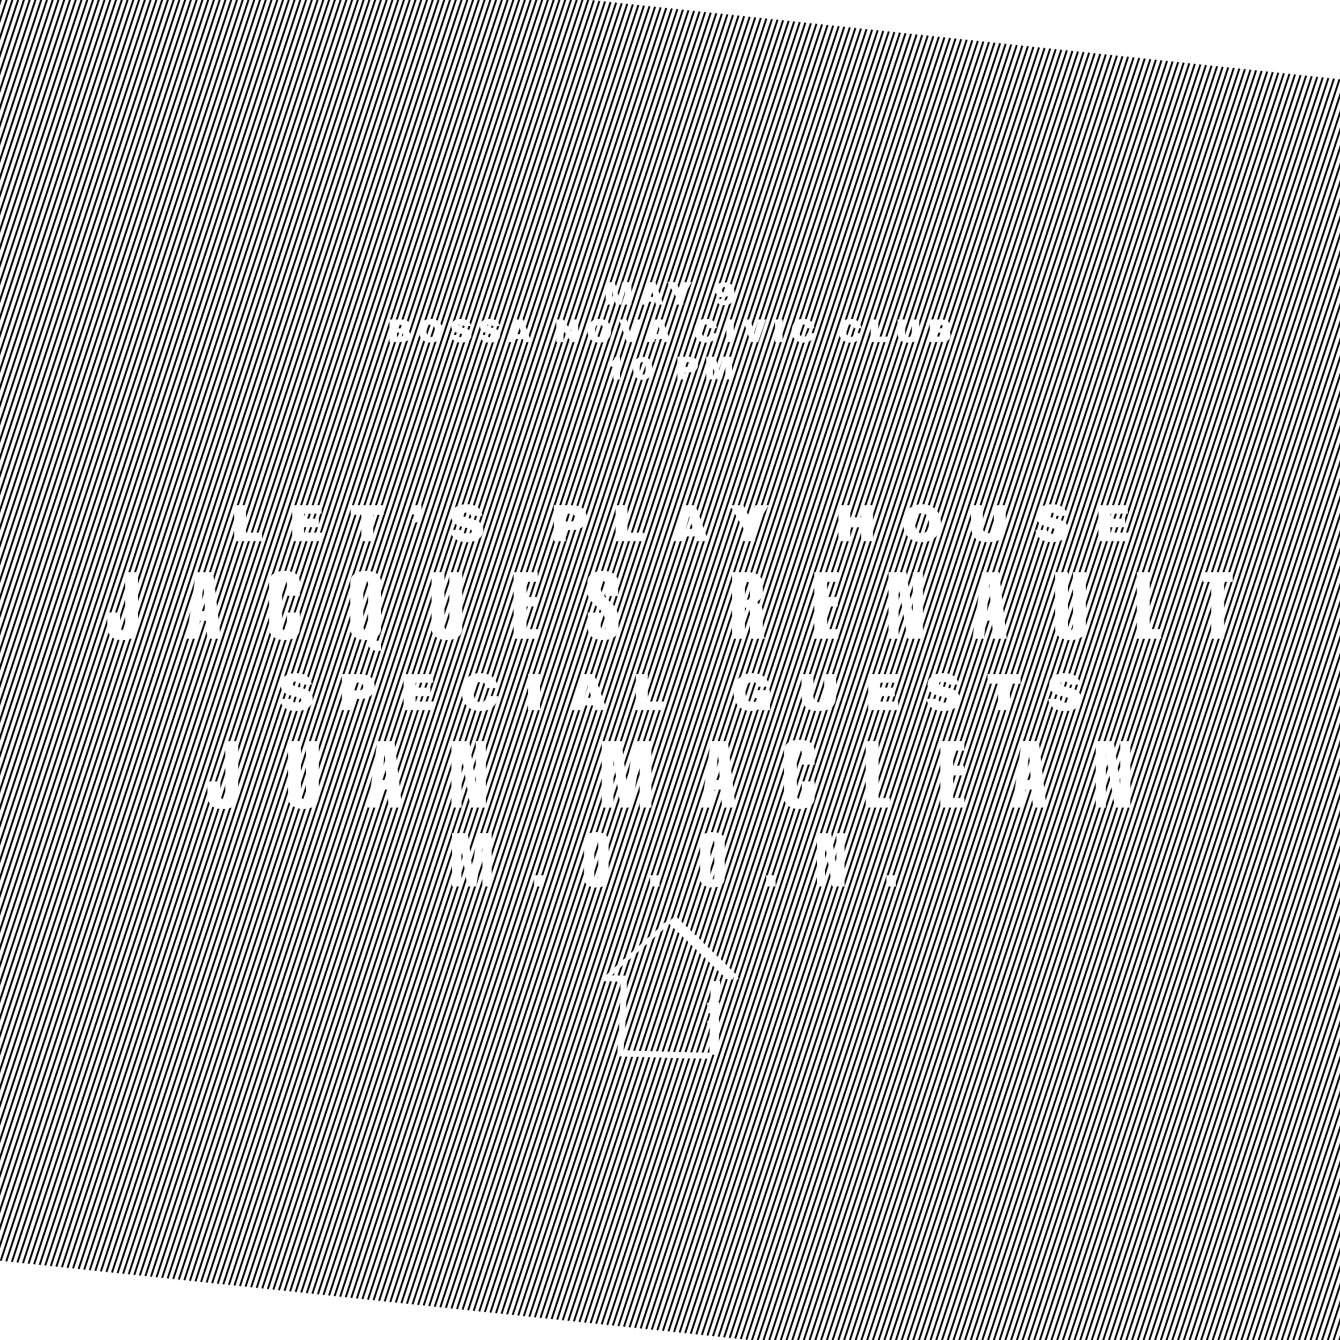 LPH with Jacques Renault, The Juan Maclean & M.O.O.N - フライヤー表